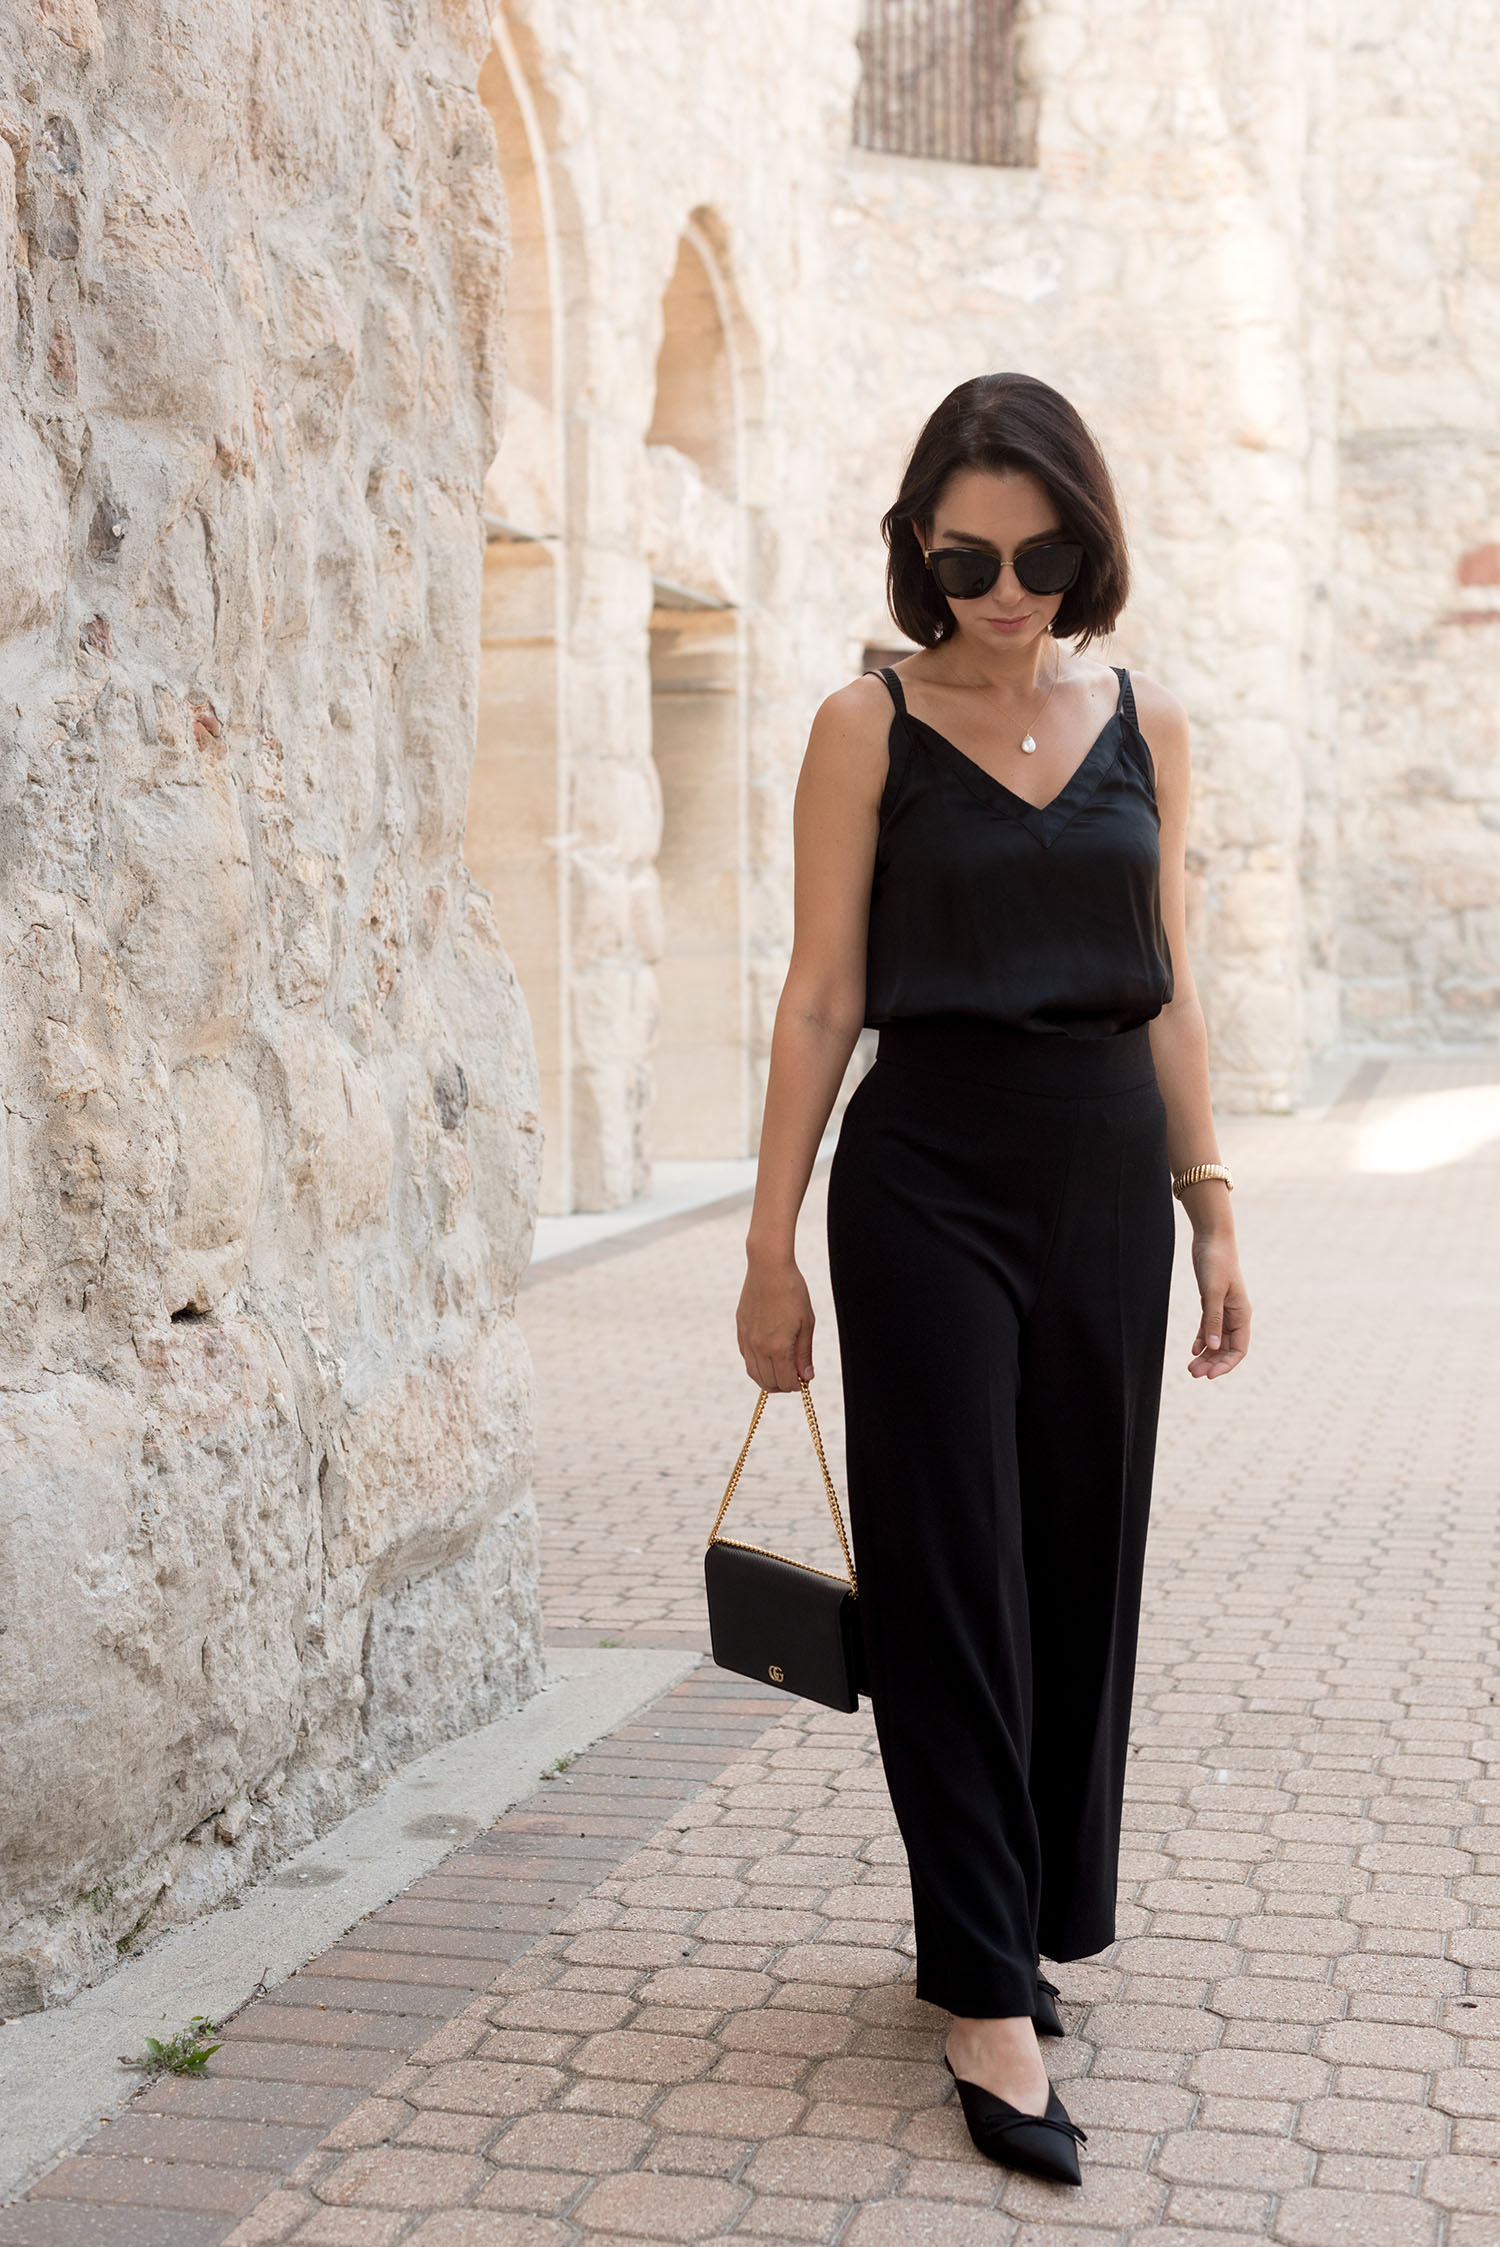 Top Canadian fashion blogger Cee Fardoe of Coco & Vera wears an Aritzia silk camisole and carries a Gucci Marmont handbag, while exploring her definition of femininity